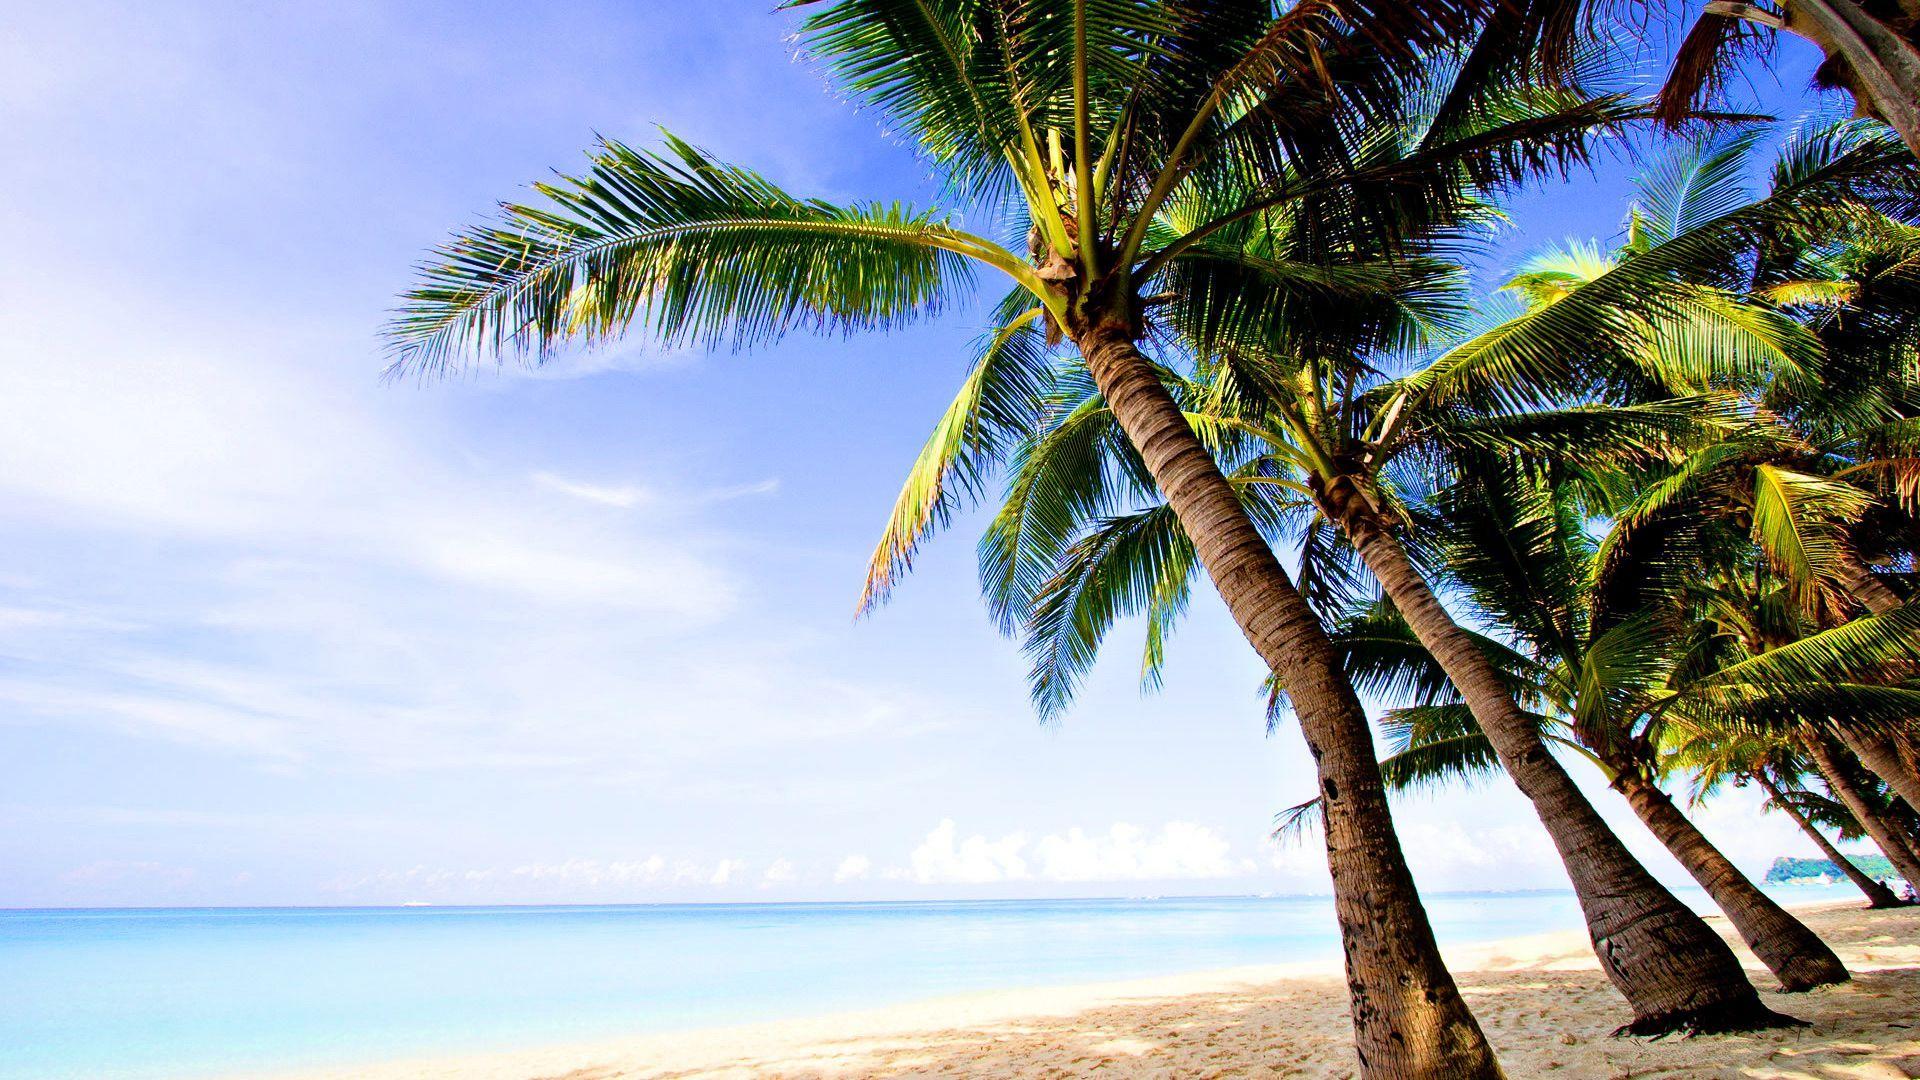 Coconut Trees Wallpaper with Beach 1920x1200PX Trees Beach